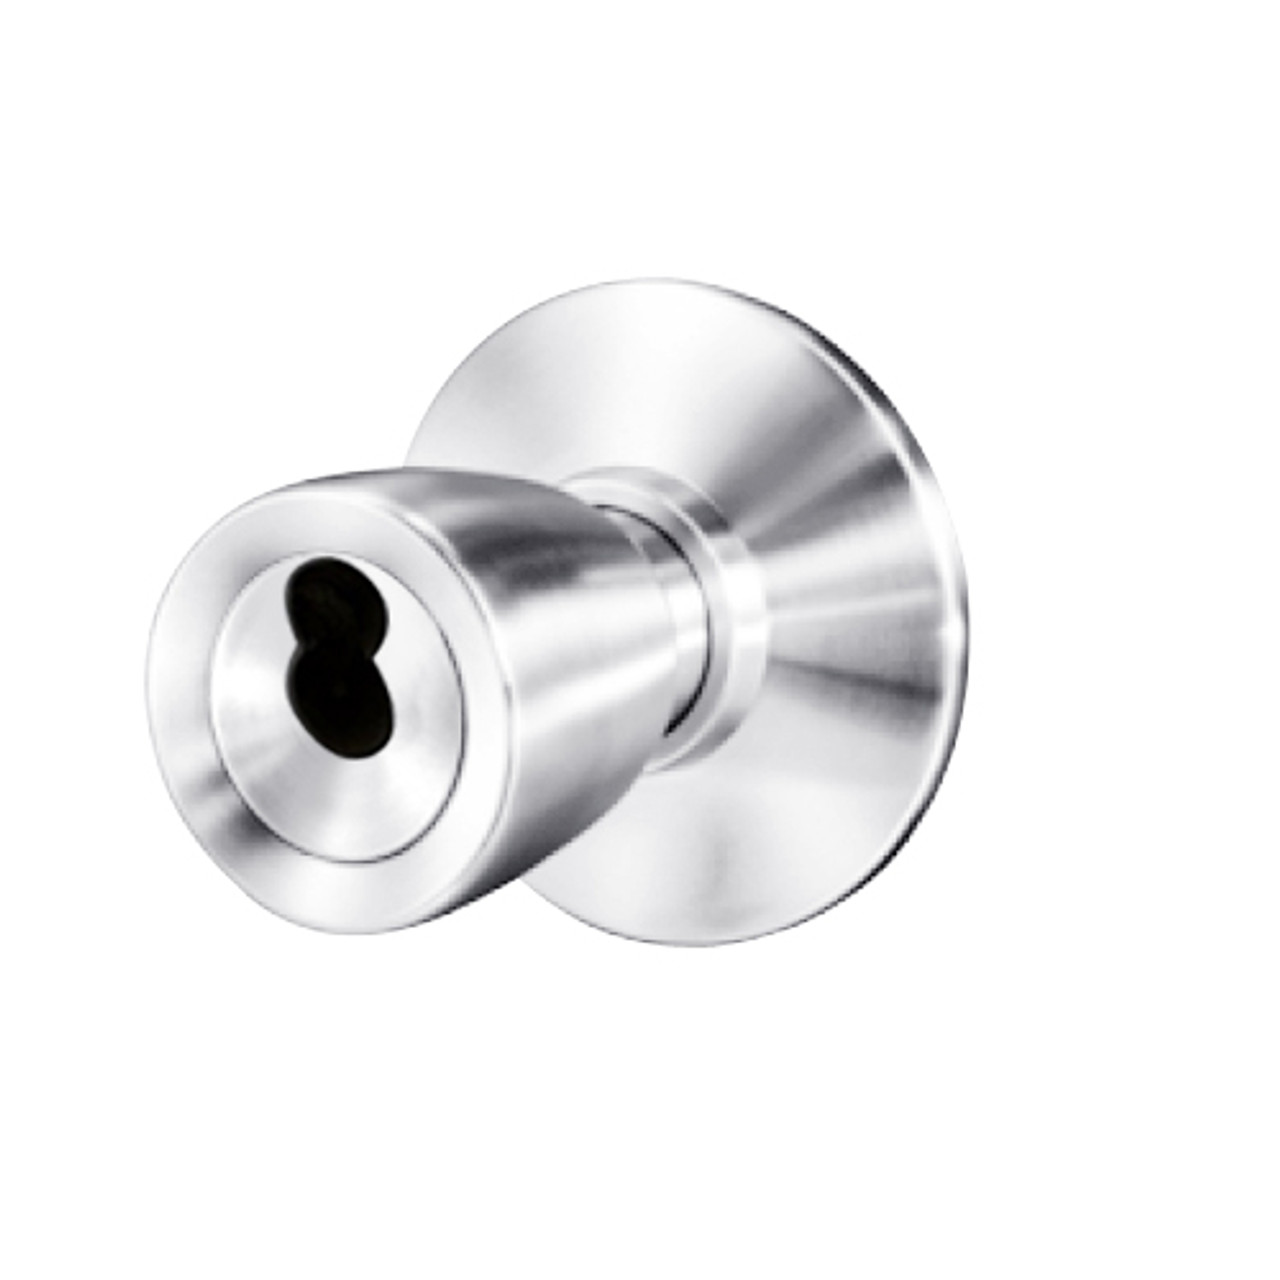 8K37AB6DSTK625 Best 8K Series Entrance Heavy Duty Cylindrical Knob Locks with Tulip Style in Bright Chrome